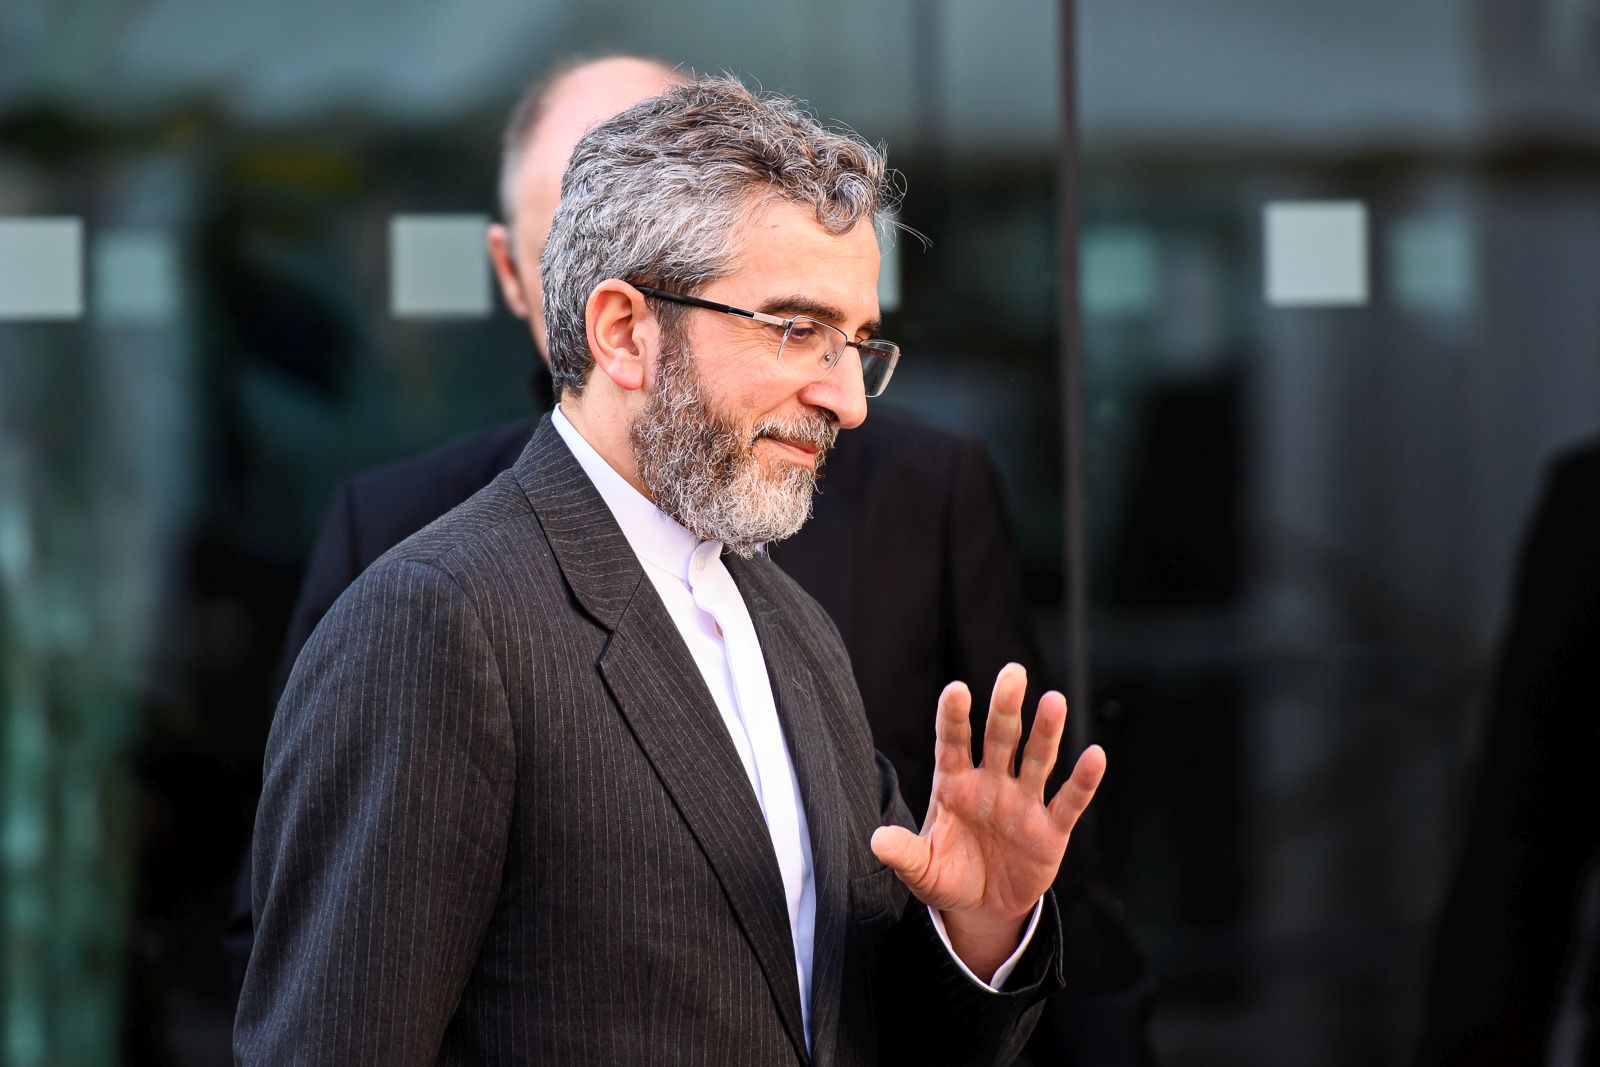 epa10105642 (FILE) Iran's Chief Negotiator for the Nuclear Agreement, Ali Bagheri Kani, leaves after a meeting for a possible next round of Joint Commission of the Joint Comprehensive Plan of Action (JCPOA) talks in Vienna, Austria, 09 March 2022 (reissued 04 August 2022). Ali Bagheri Kani arrived in Vienna on 04 August 2022 to participate in a new round of negotiations for the revival of the 2015 nuclear pact, he said on Twitter.  EPA/CHRISTIAN BRUNA